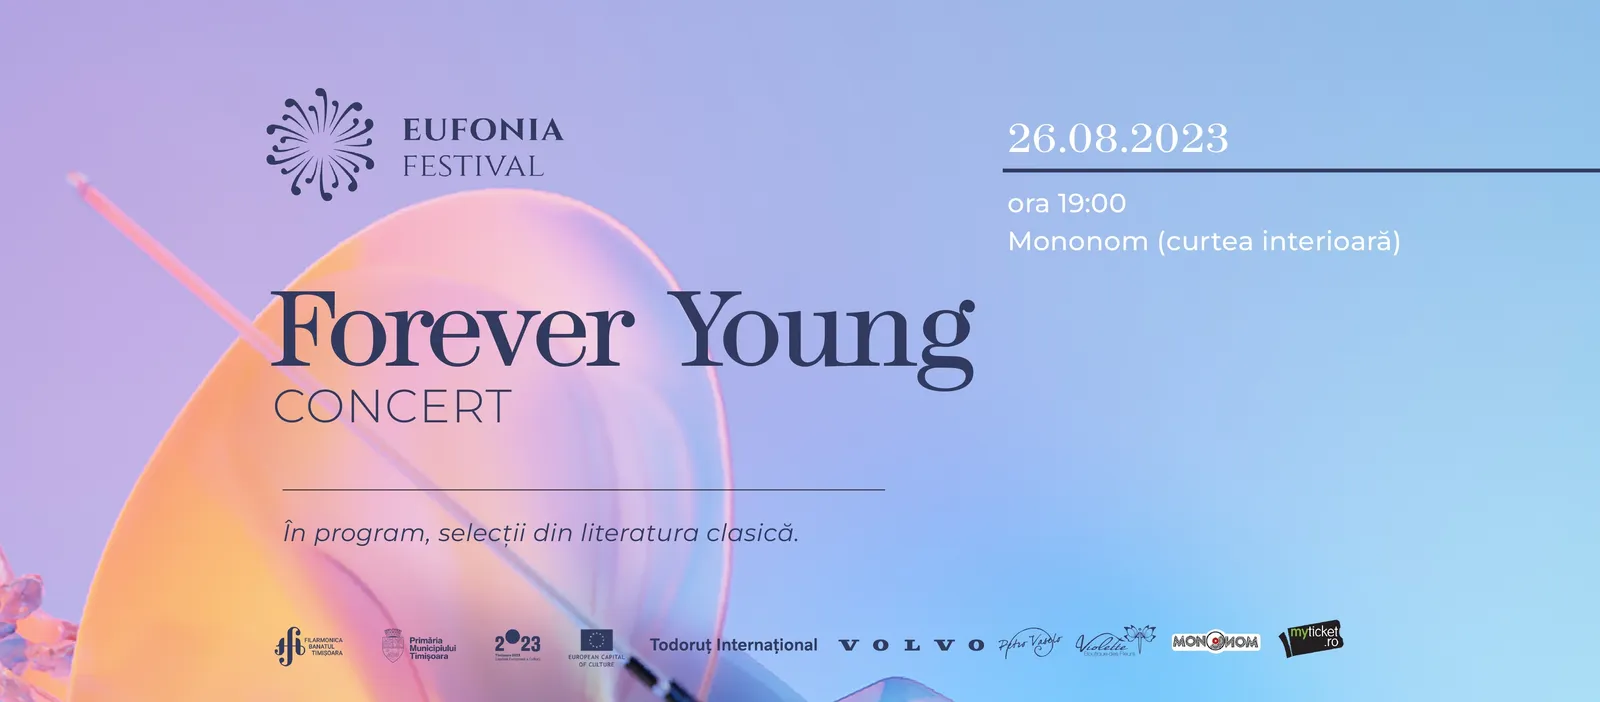 Eufonia Festival Concert | FOREVER YOUNG